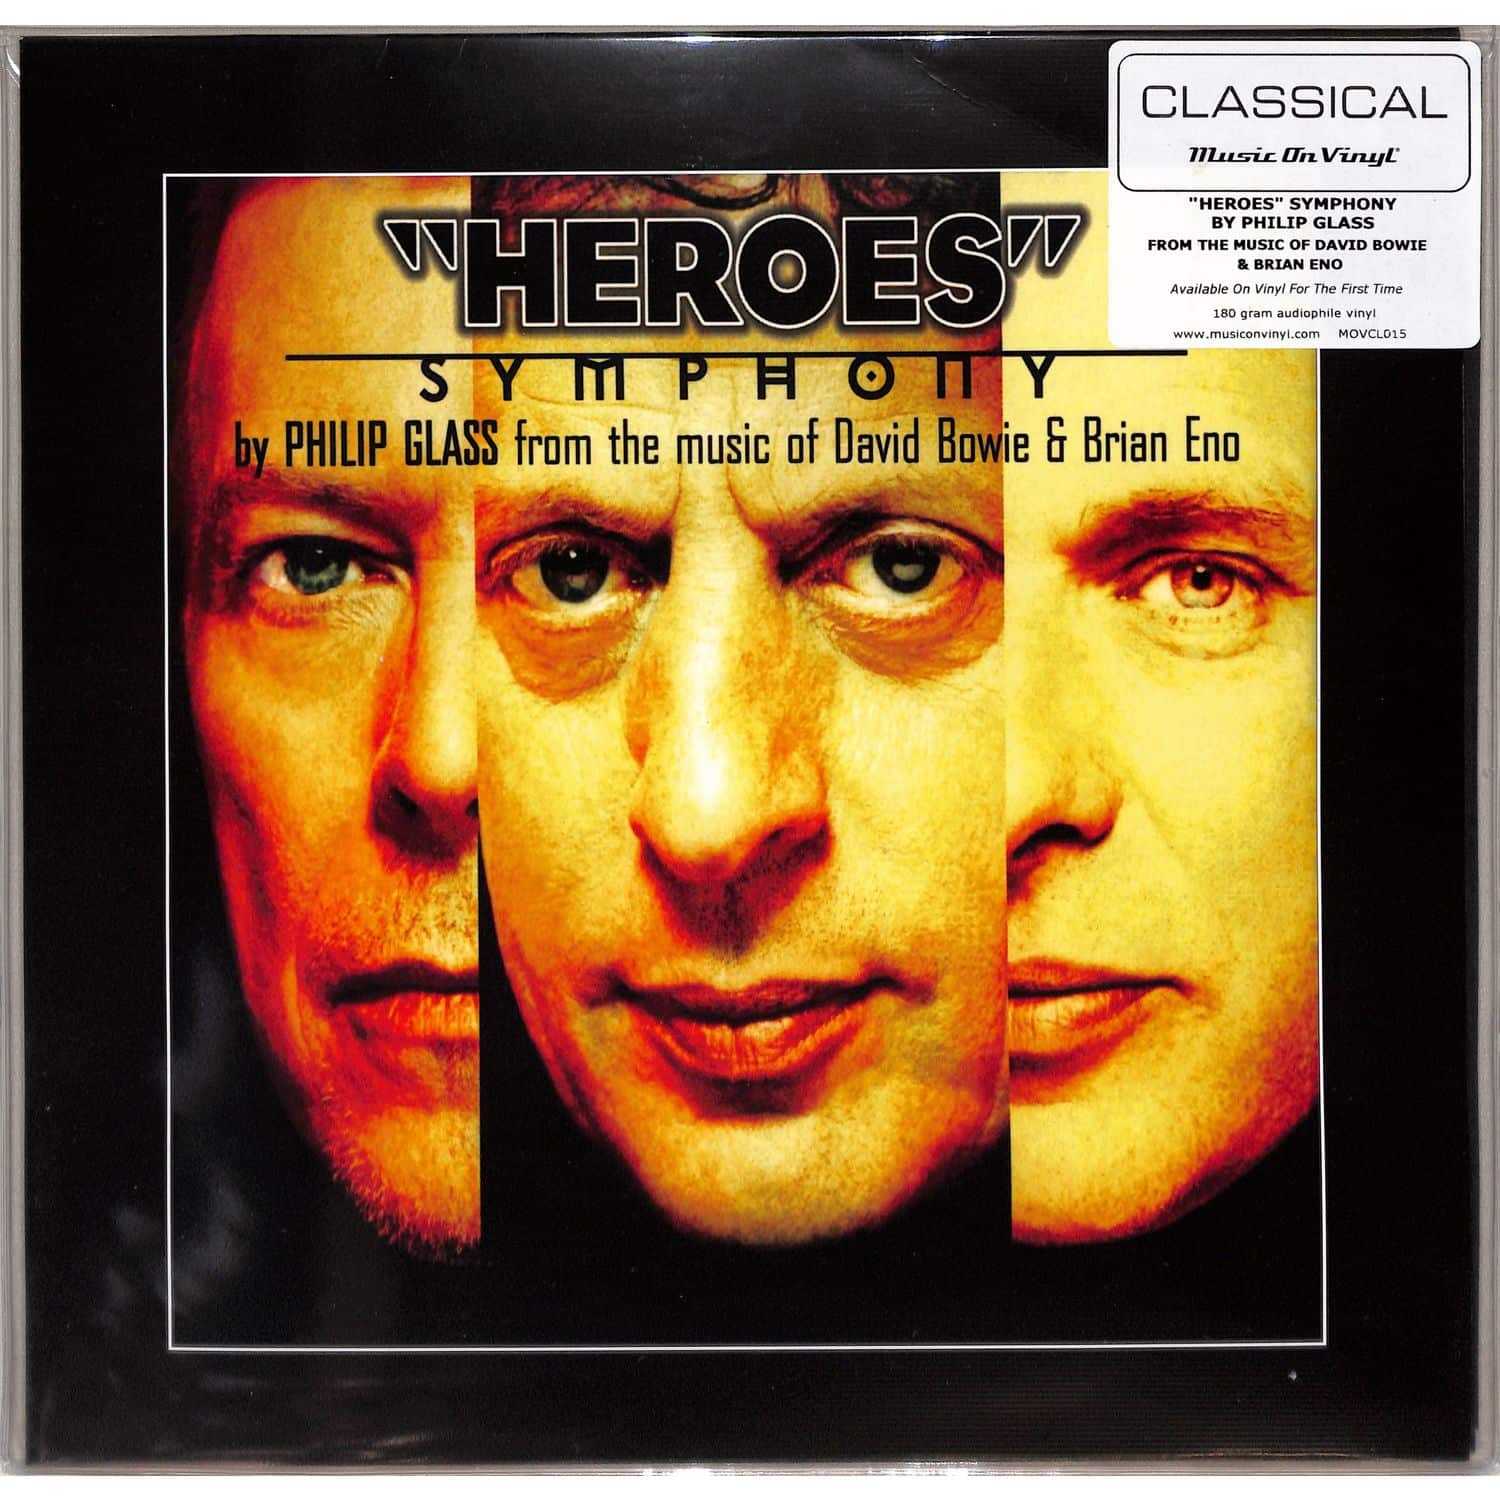 David Bowie /Philip Glass/Brian Eno / Philip Glass - HEROES SYMPHONY 